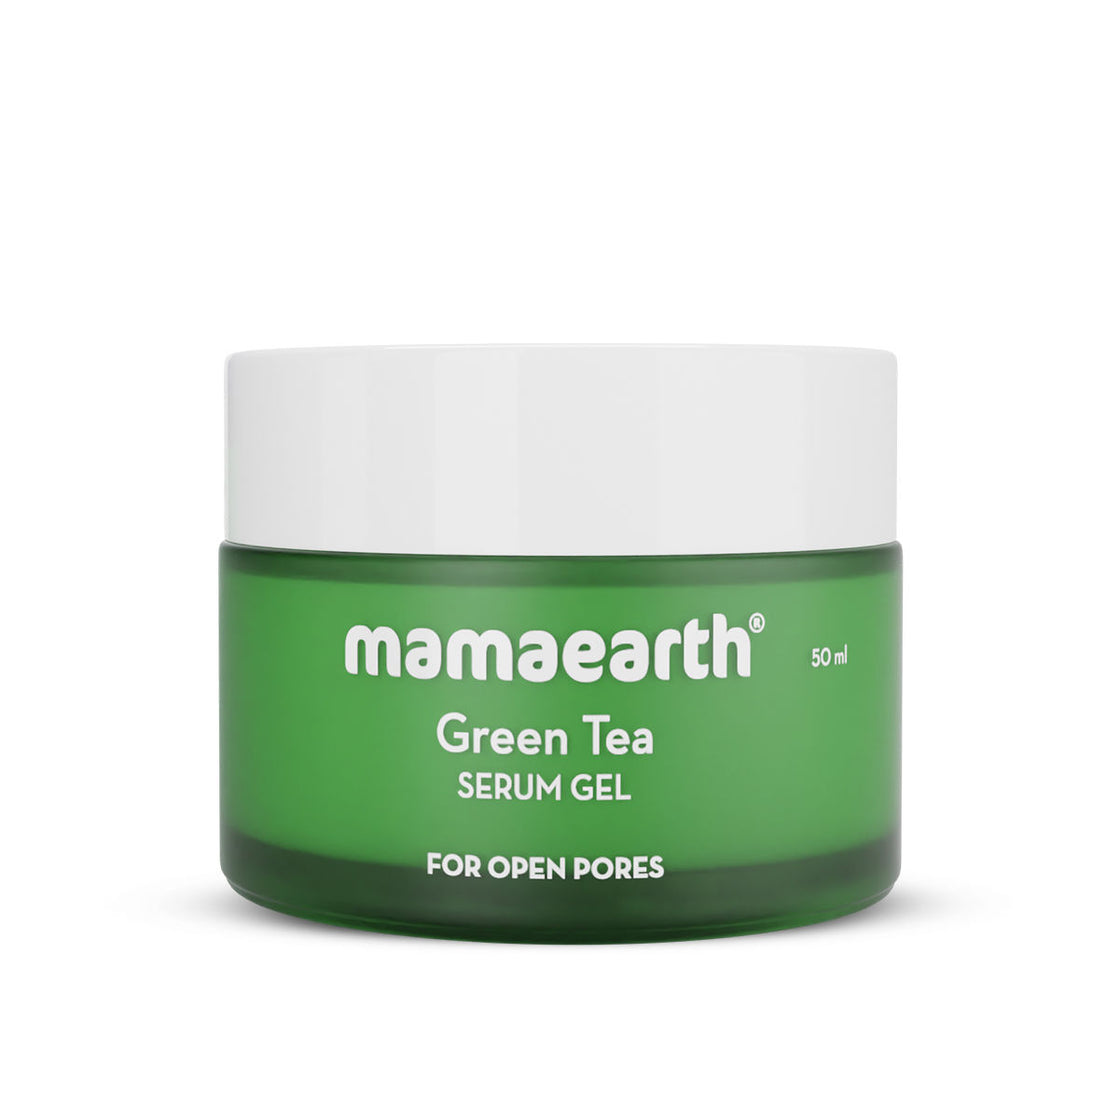 Mamaearth Green Tea Serum Gel With Green Tea & Collagen For Open Pores - Moisturizers